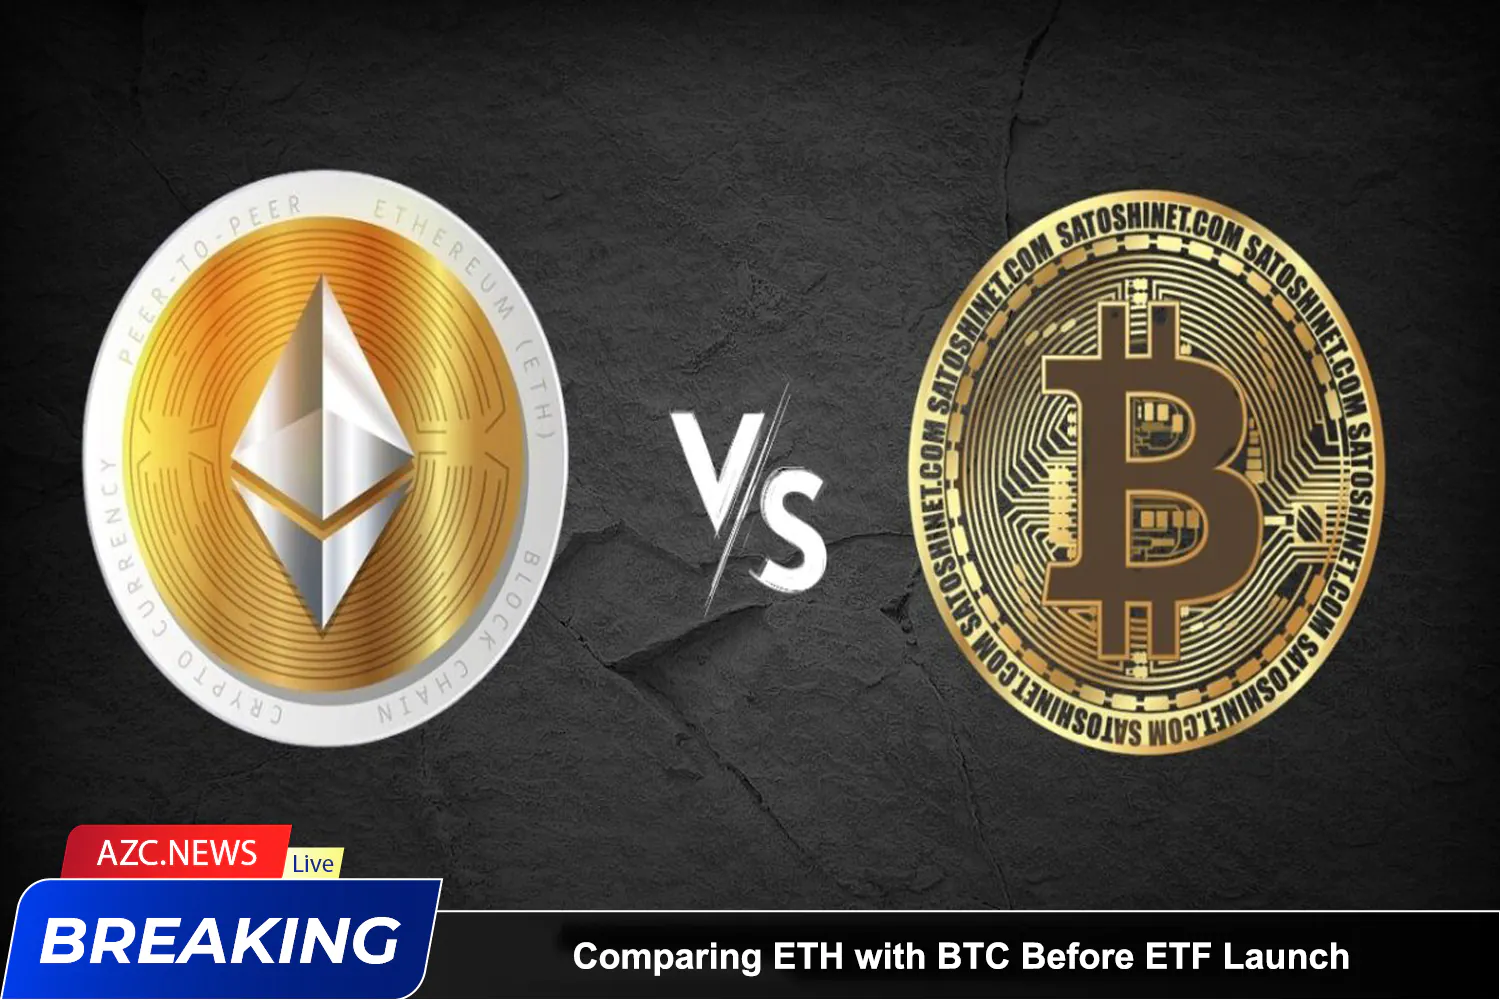 Azcnews Comparing Eth With Btc Before Etf Launch